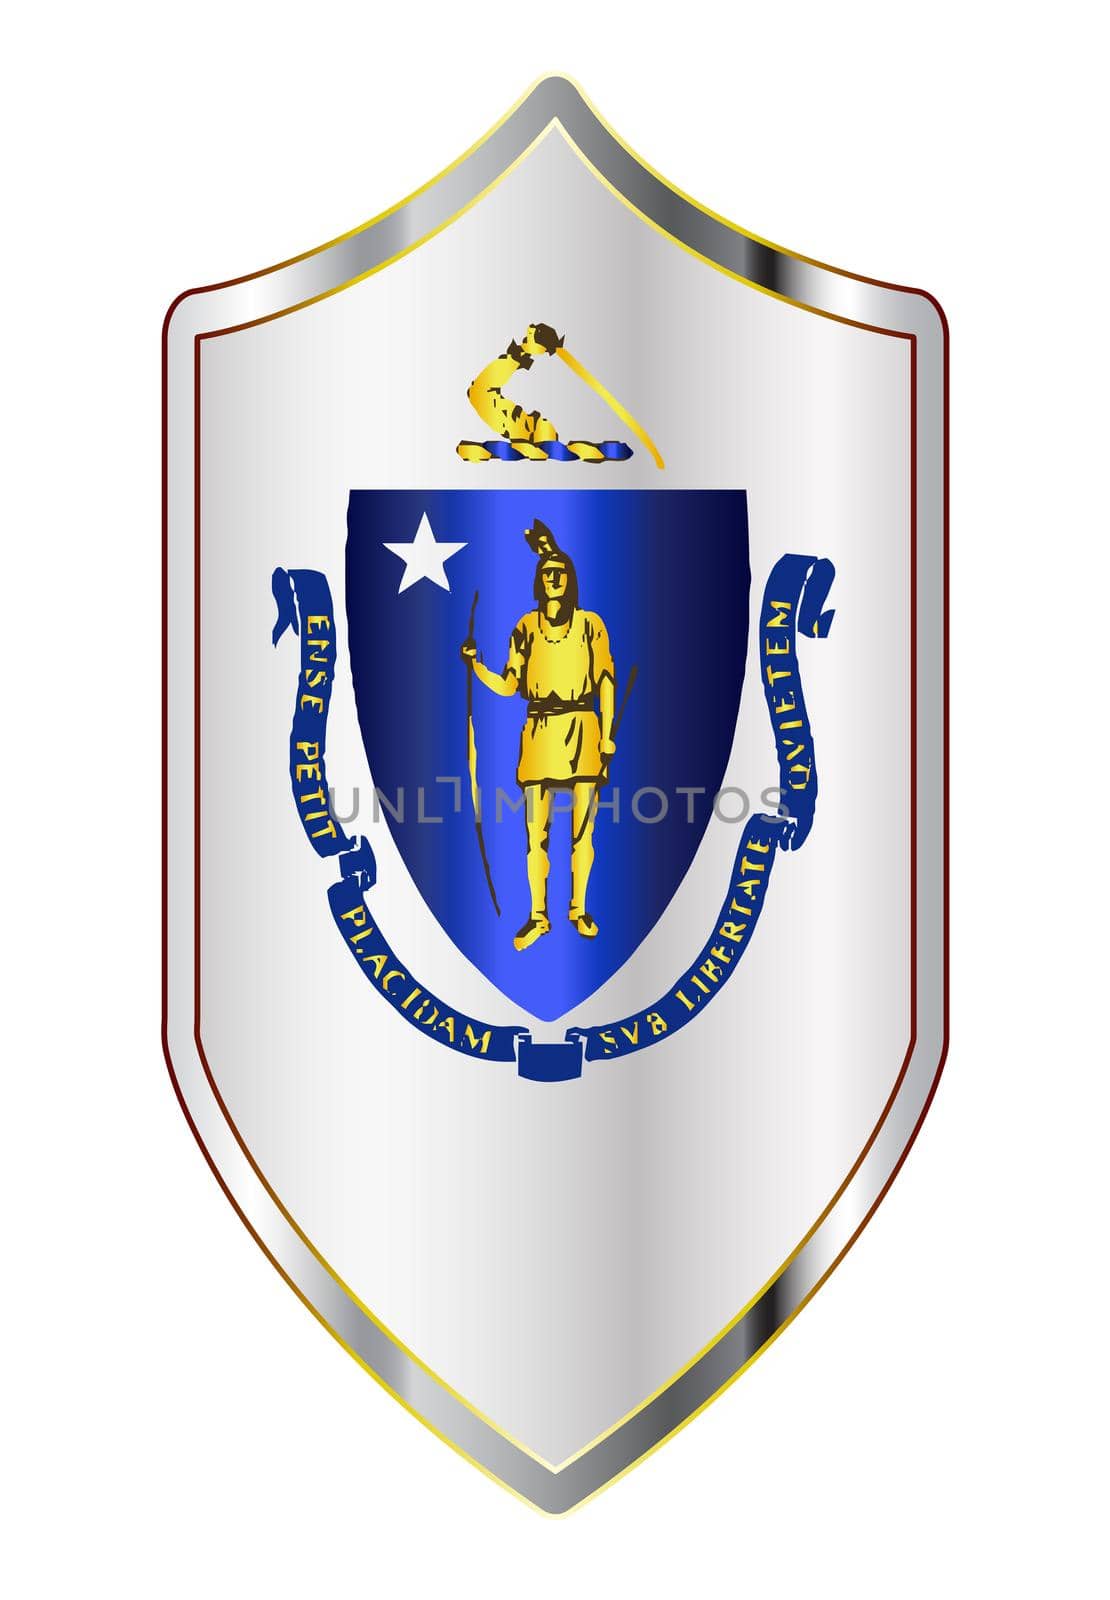 A typical crusader type shield with the state flag of Massachusetts all isolated on a white background